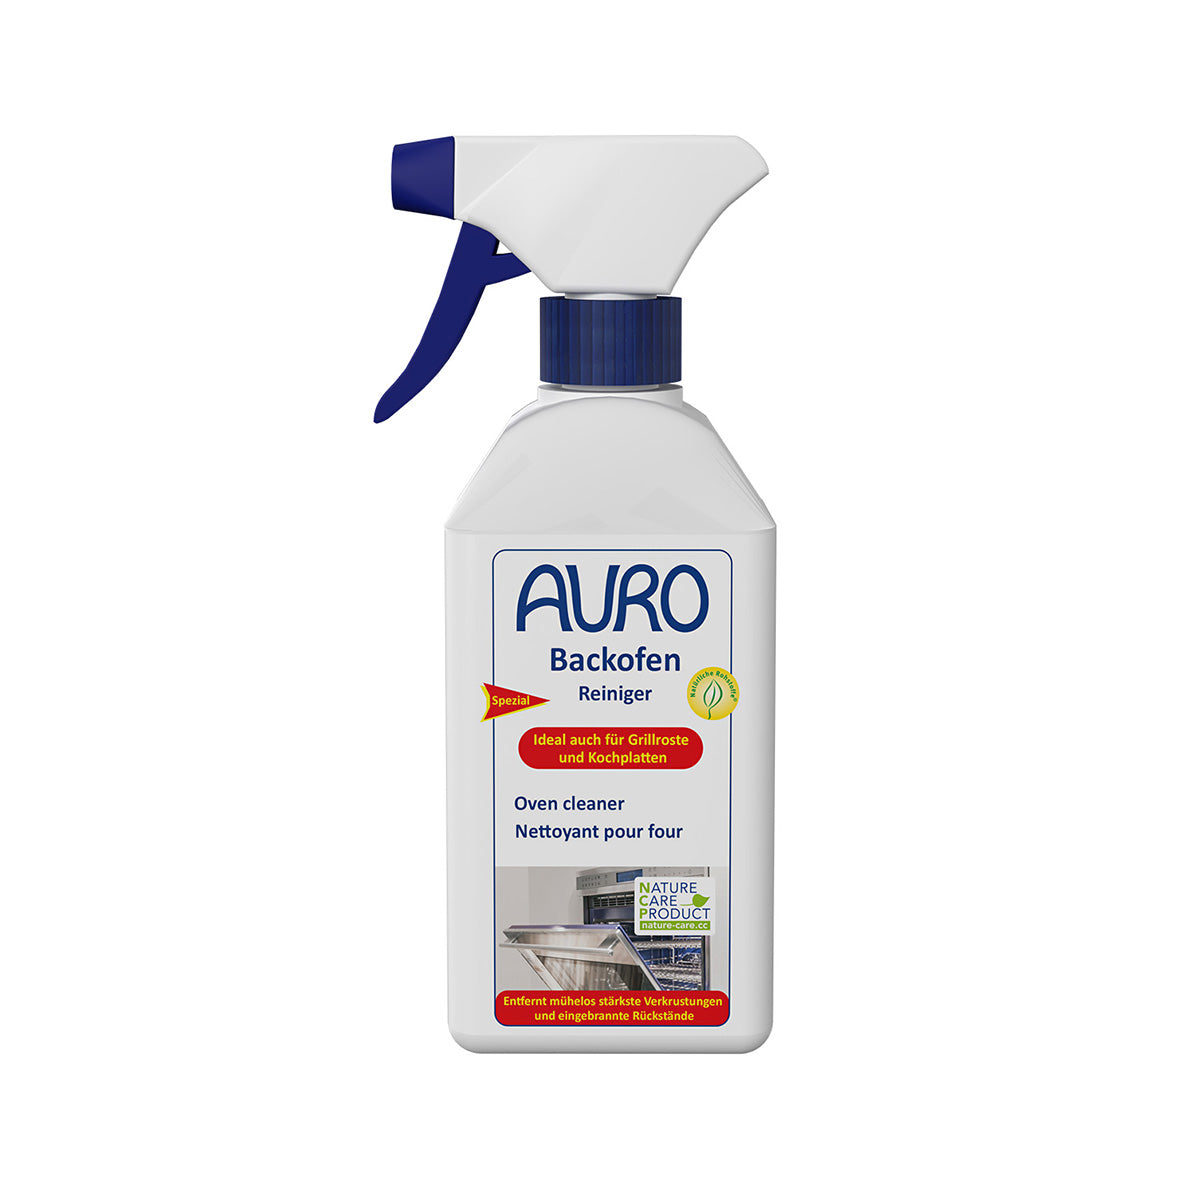 AURO #660 Mircrowave & Oven Cleaner